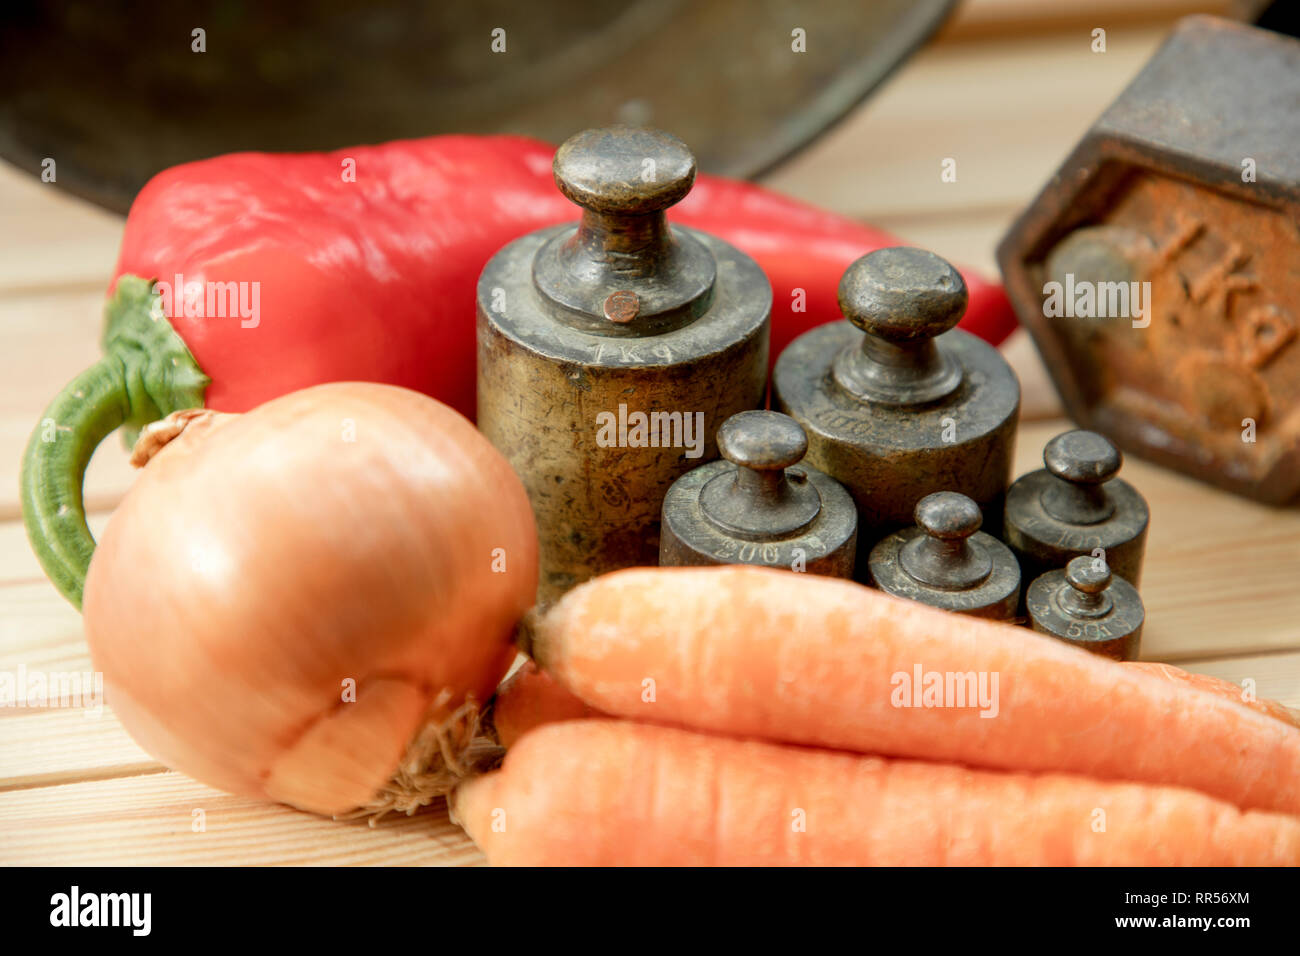 Old rusty scale weight on wooden table, Old rusty iron scale weight, vegetables Stock Photo